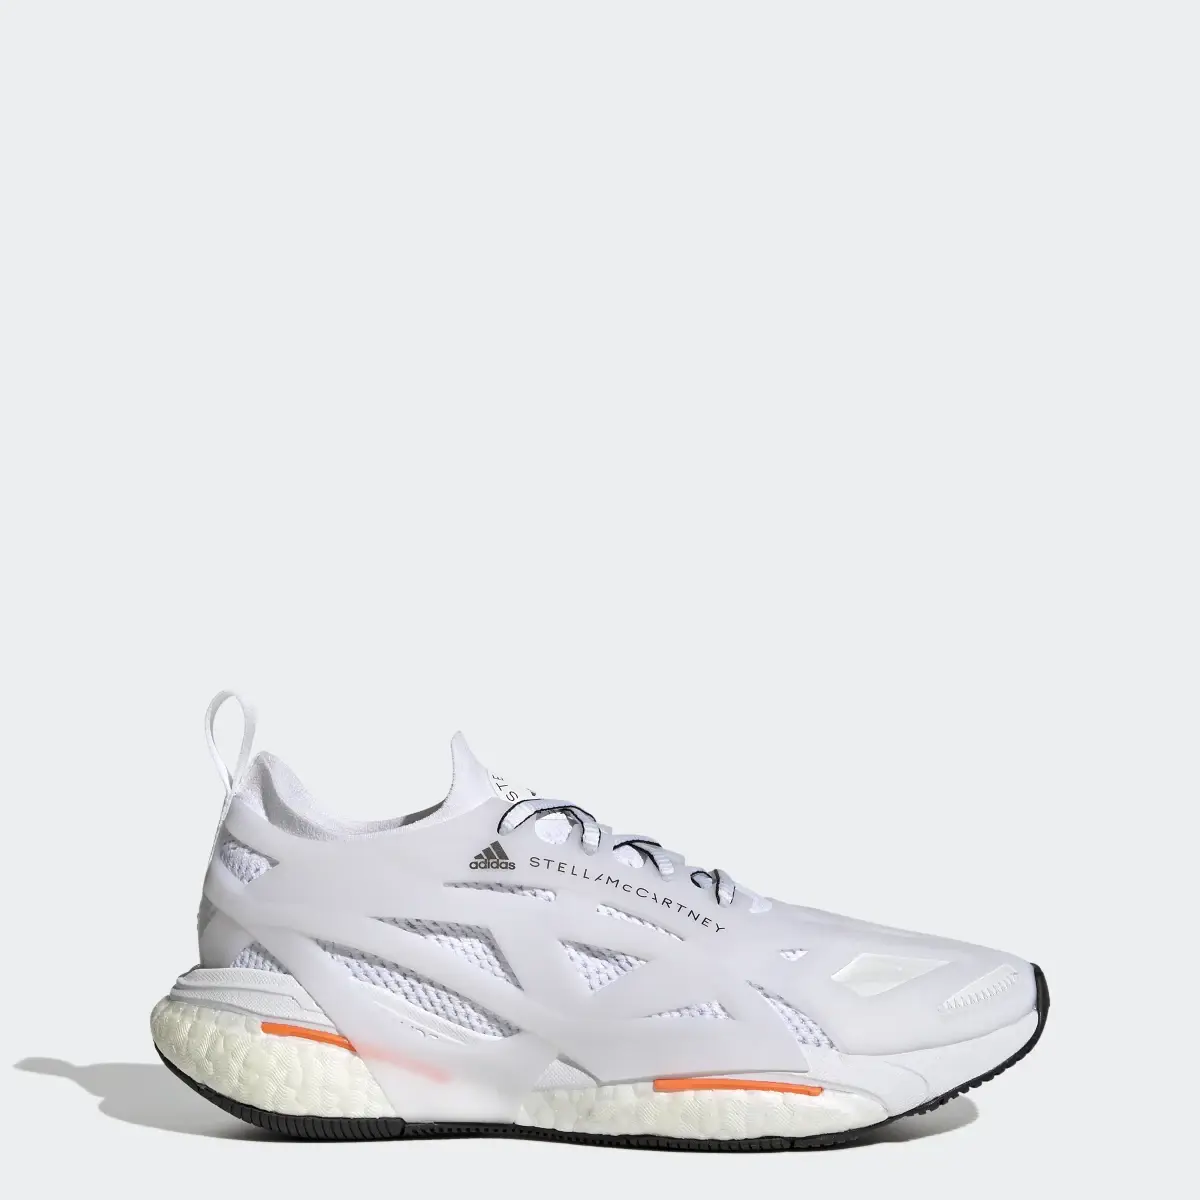 Adidas by Stella McCartney Solarglide Running Shoes. 1